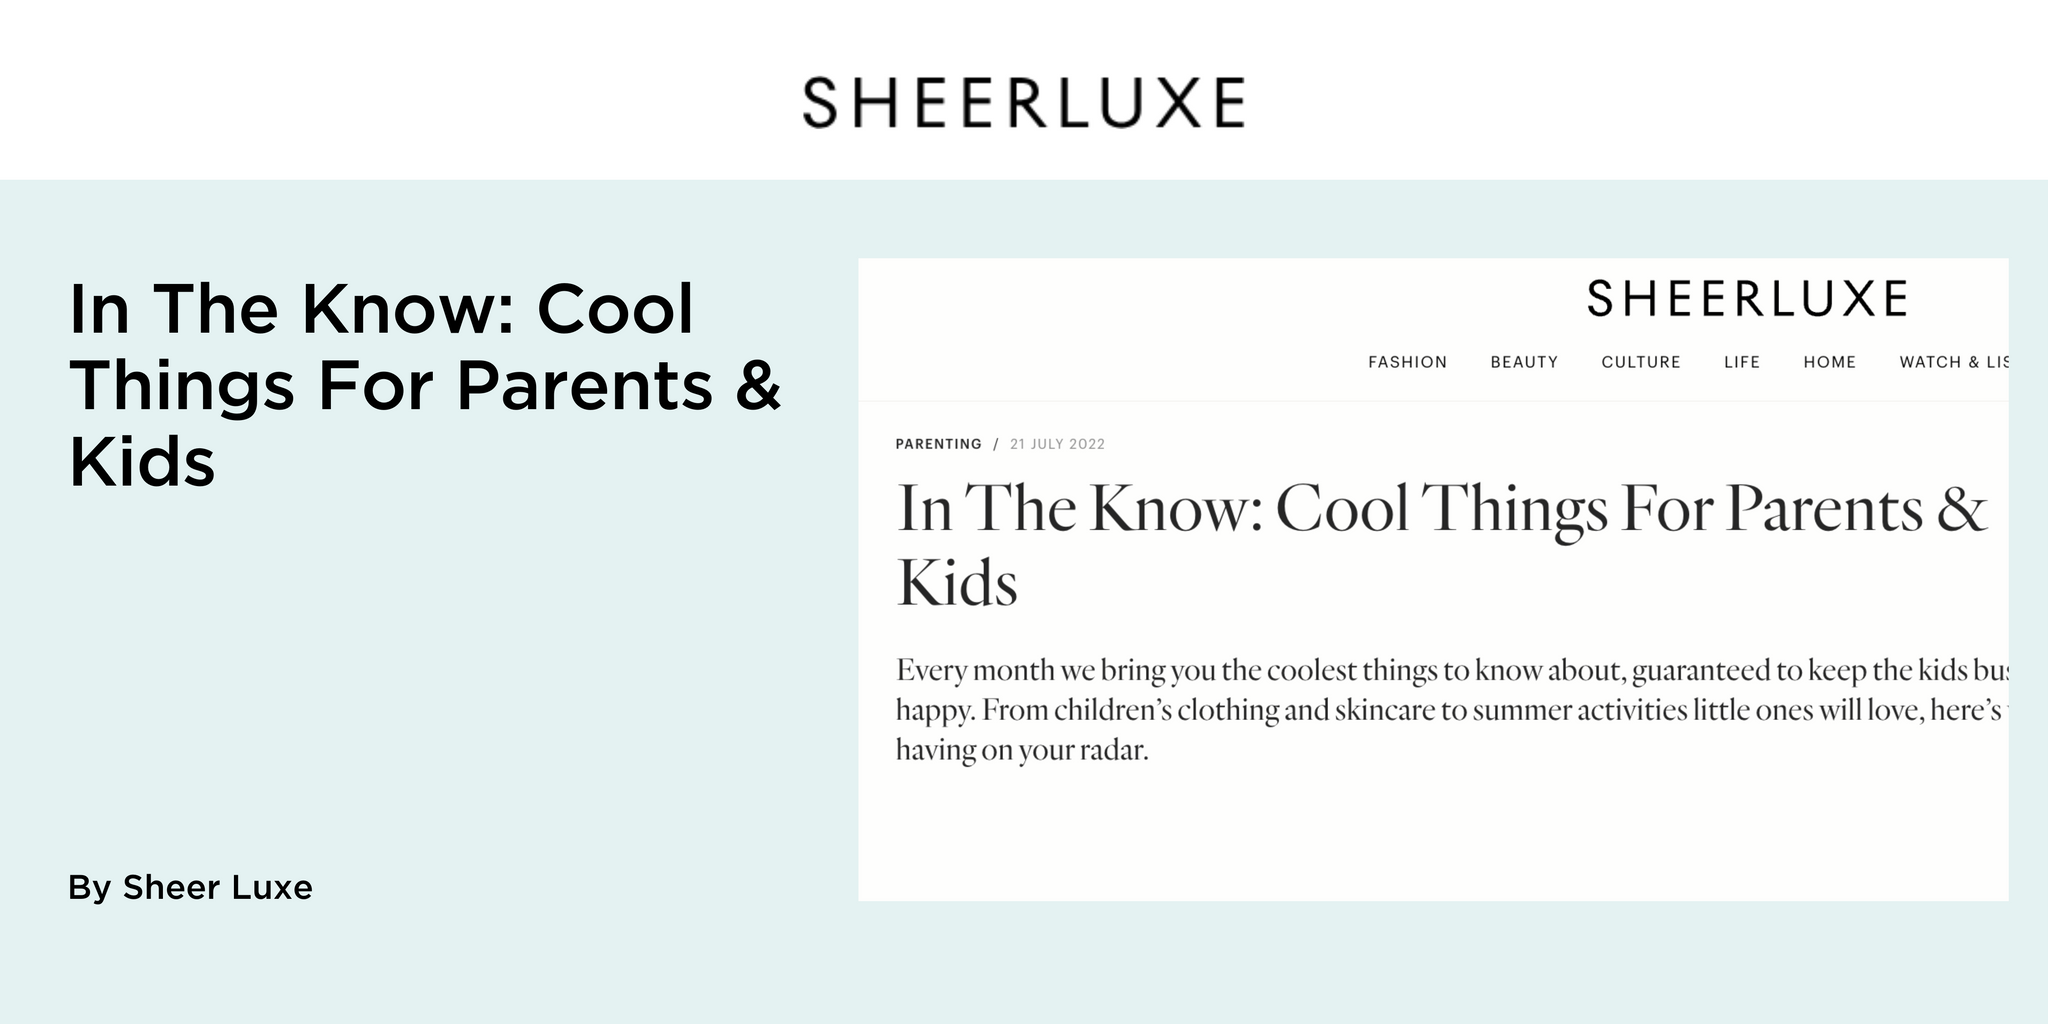 In The Know: Cool Things For Parents & Kids